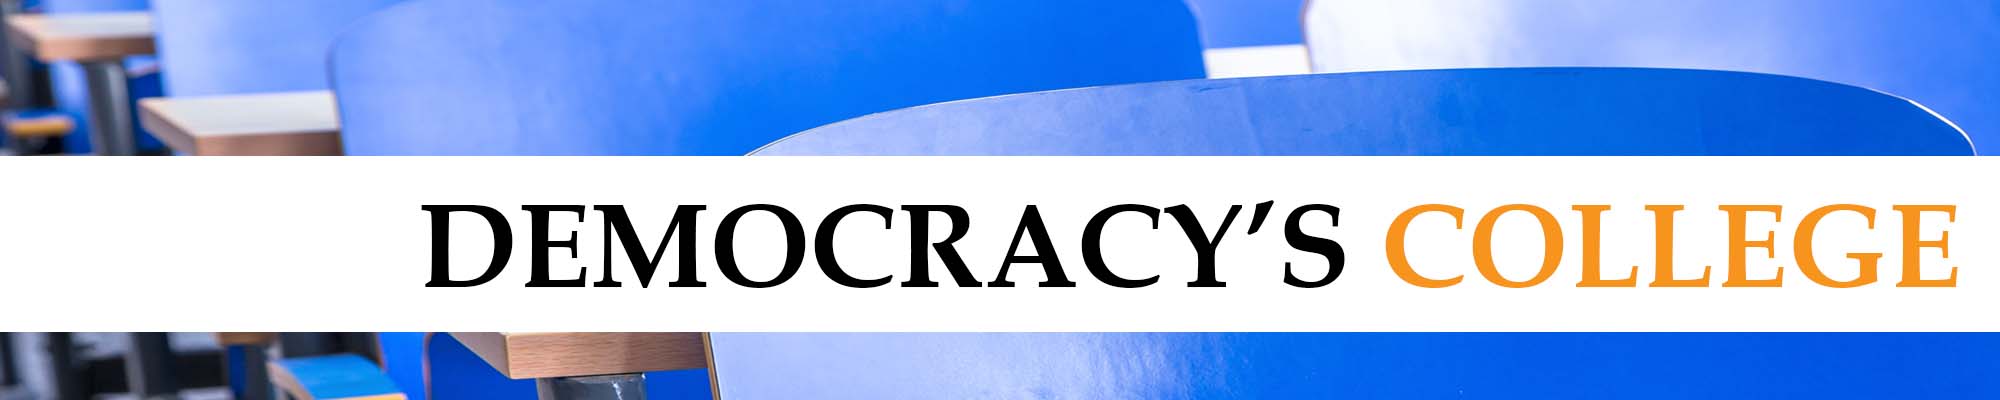 Podcast banner - Democracy's College